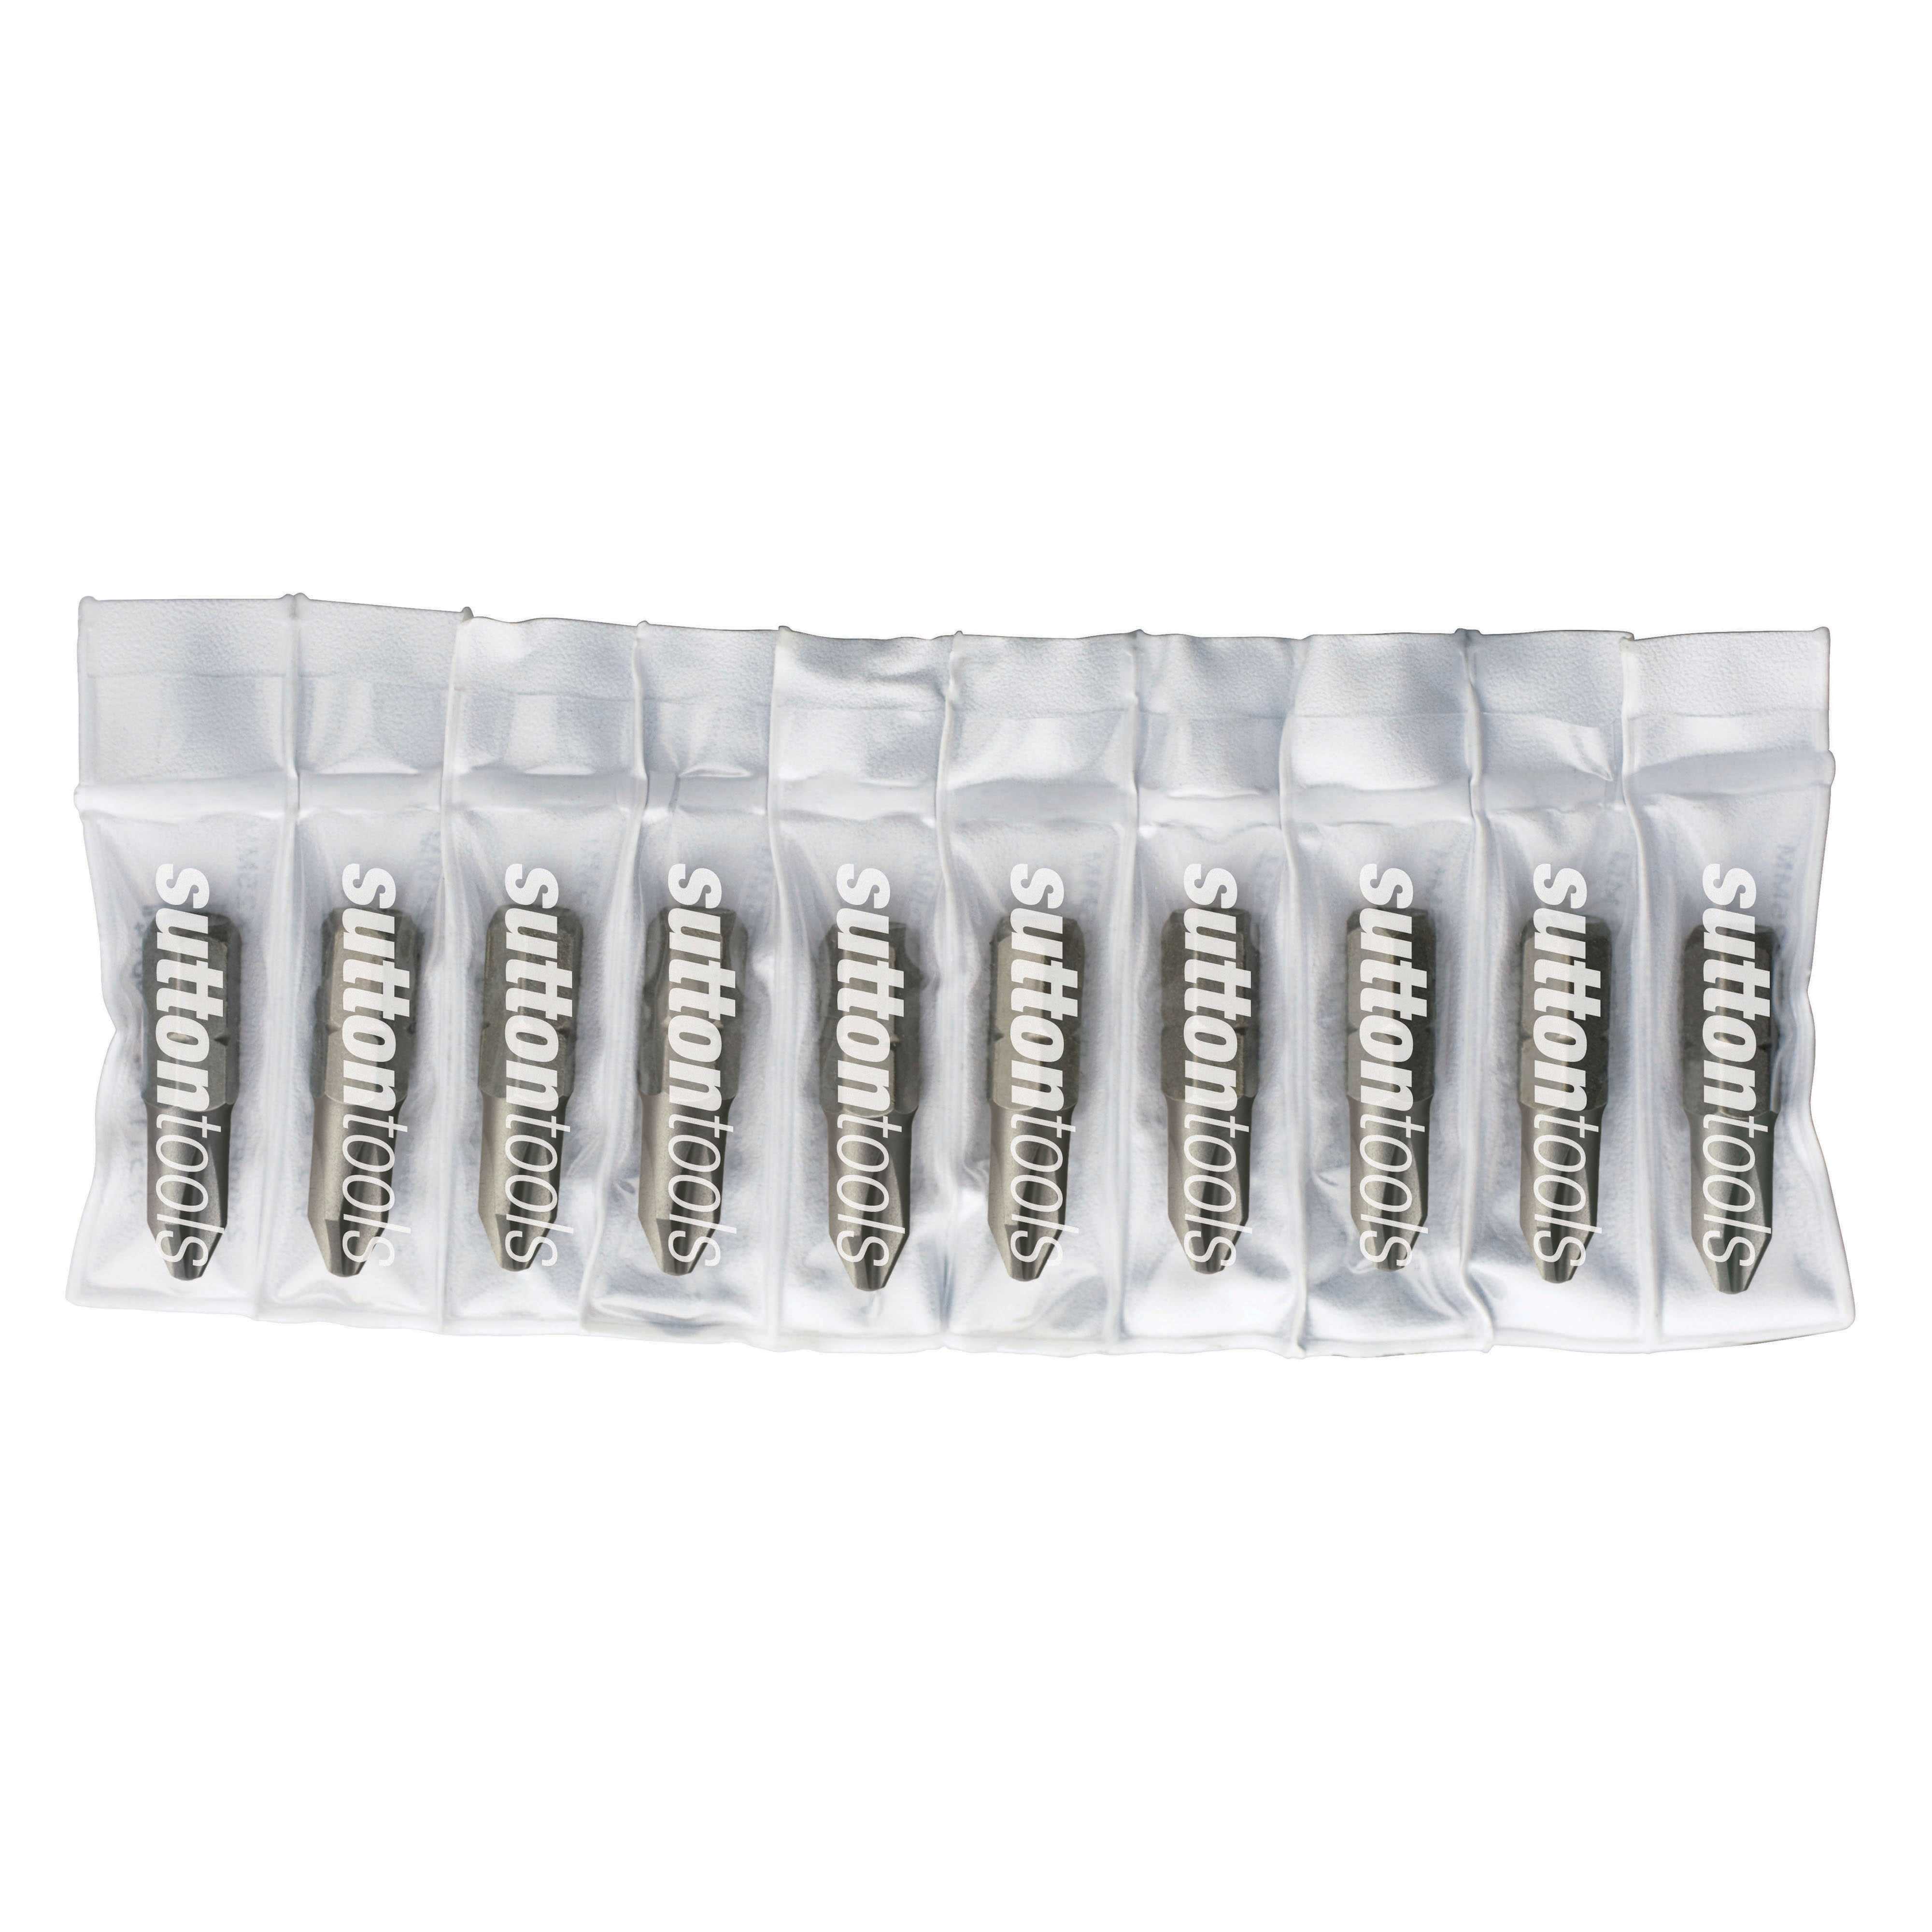 5 x SUTTON IMPACT PHILLIPS HEAD PH2 x 150mm POWER INSERT BITS FOR IMPACT DRIVERS